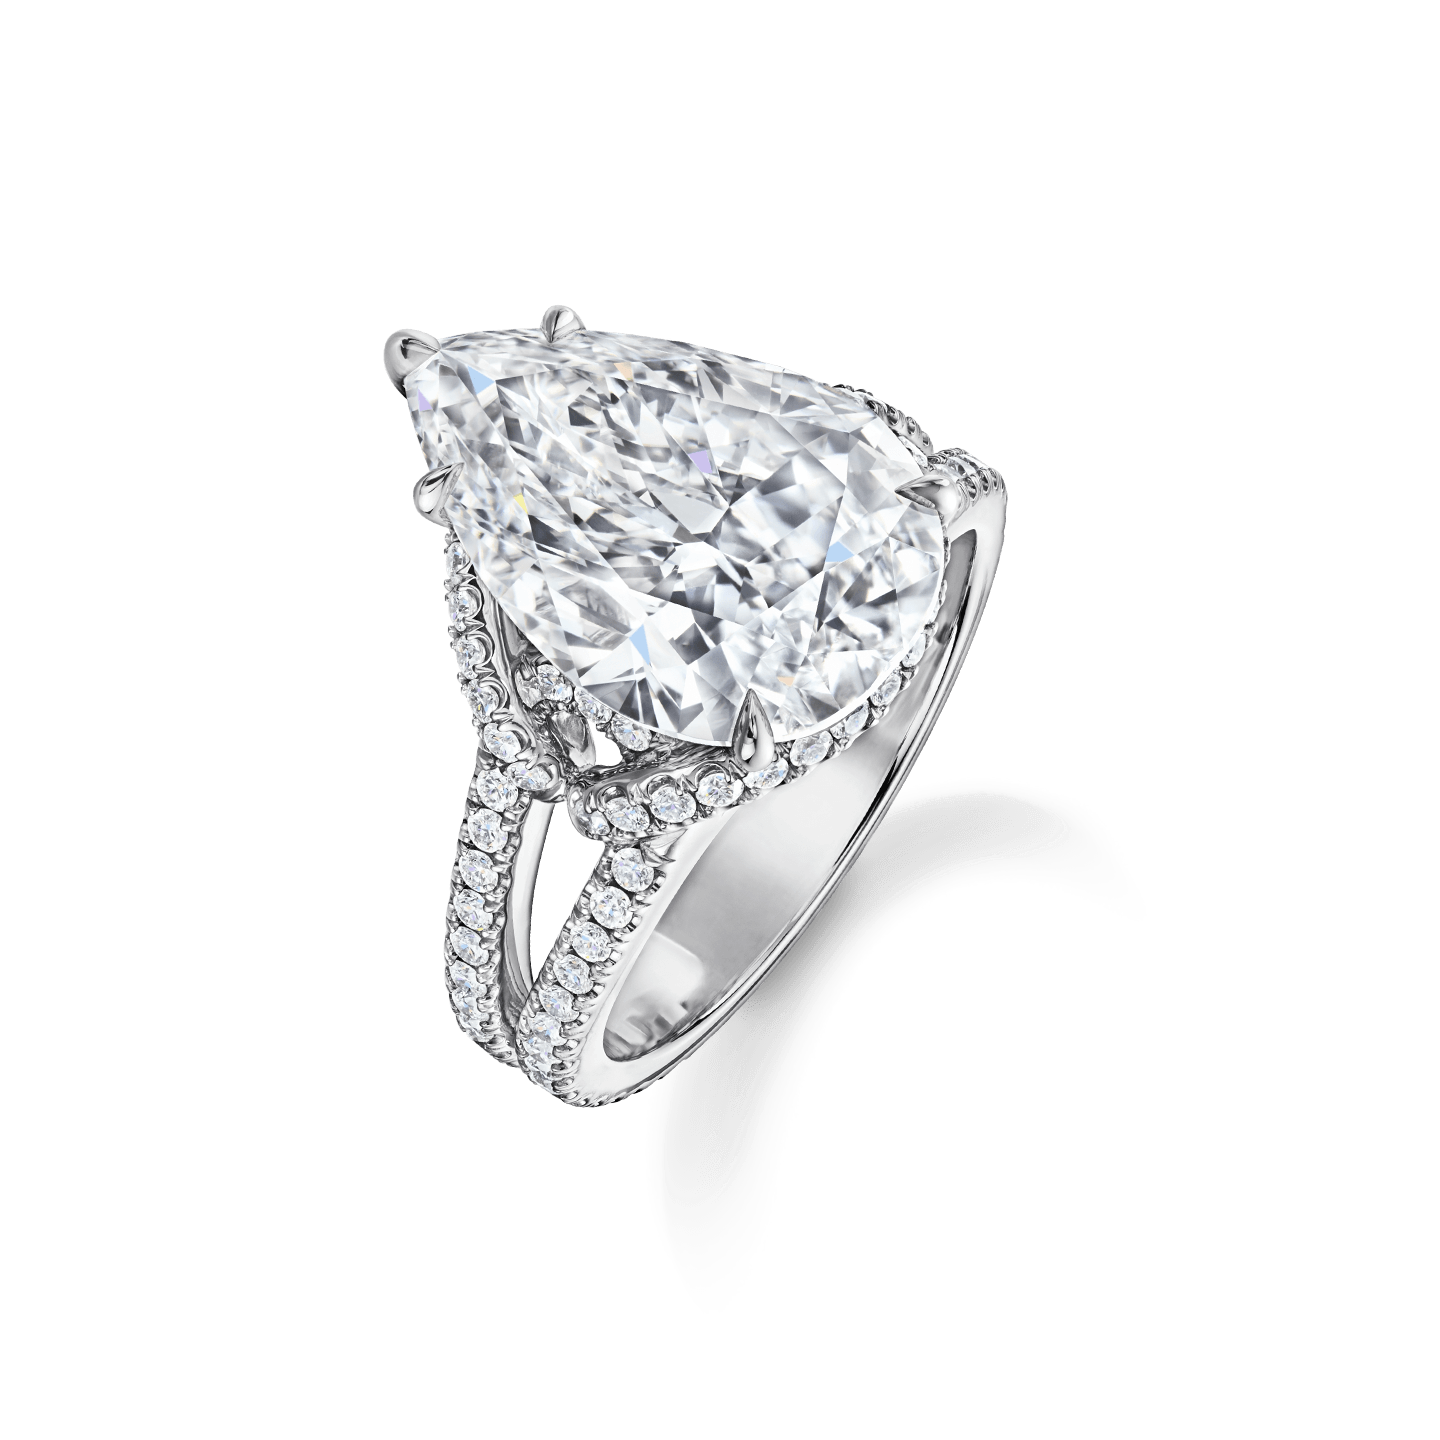 Bridal Couture Pear-Shaped Diamond Engagement Ring